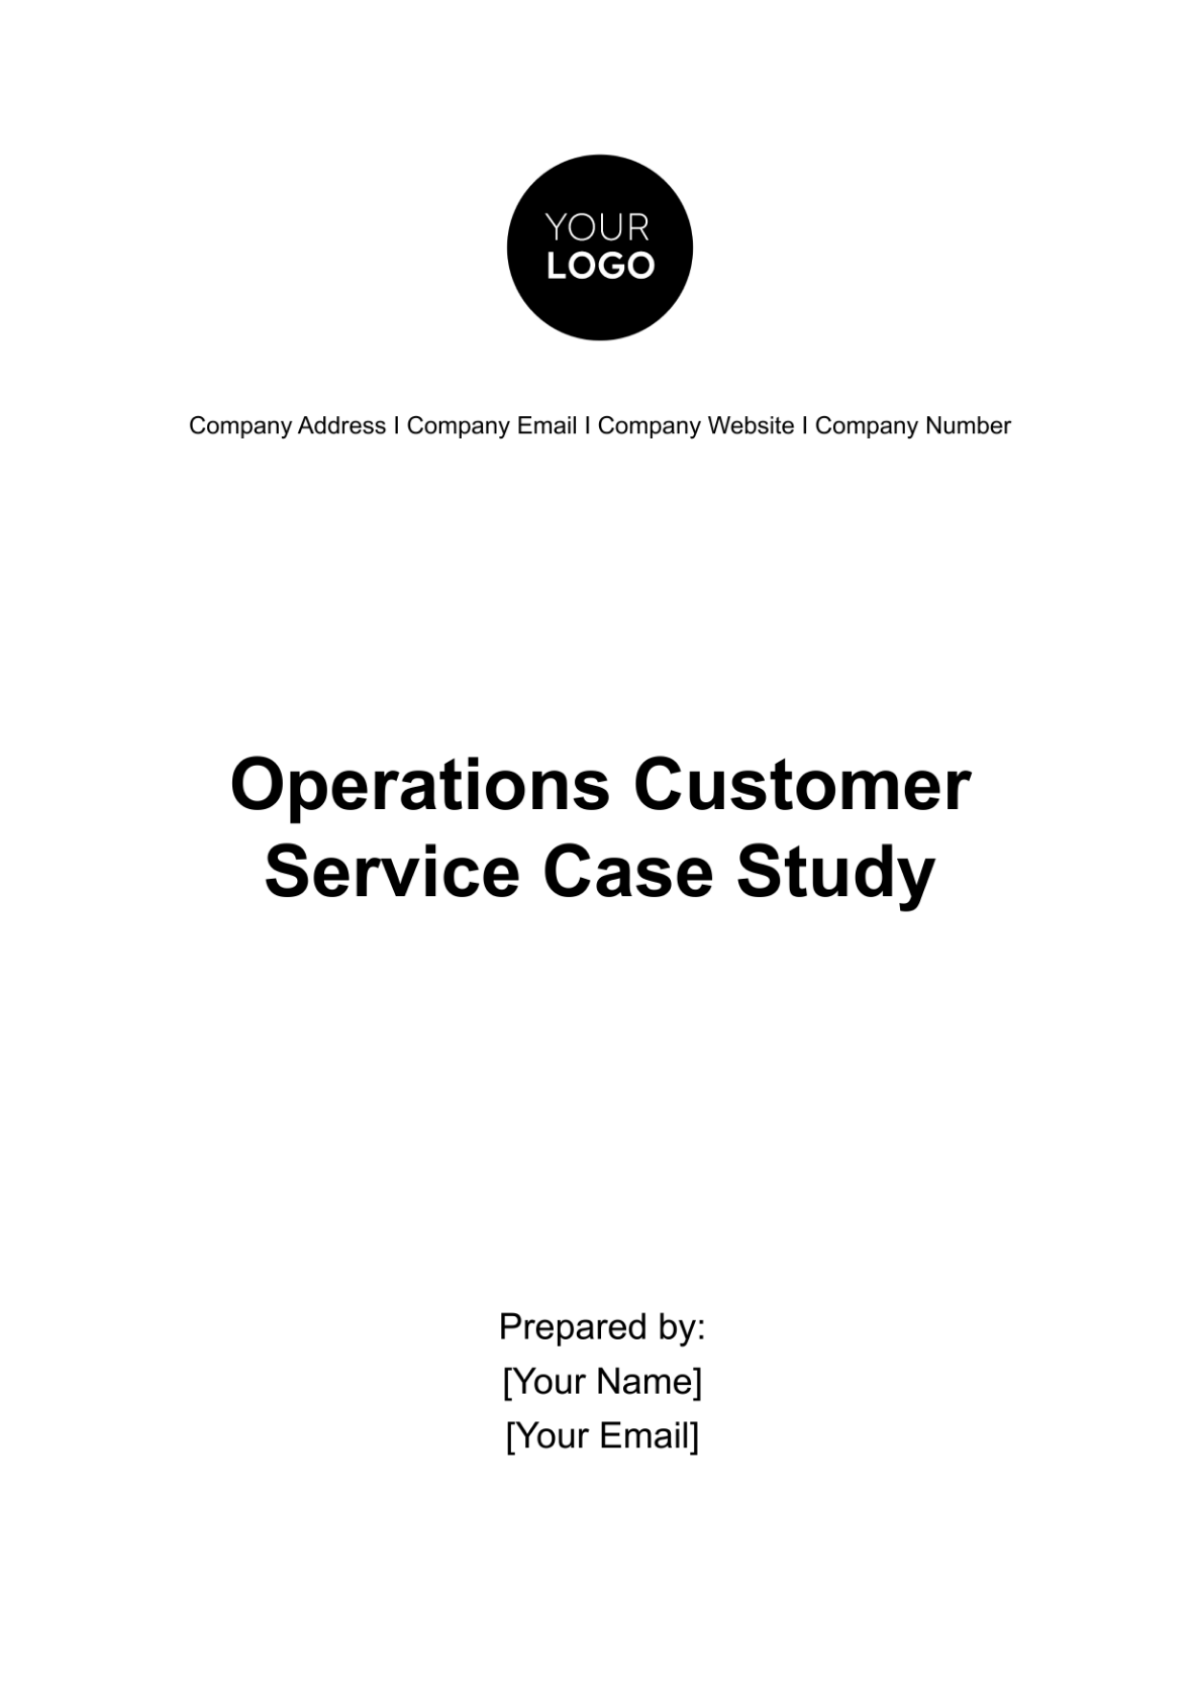 Operations Customer Service Case Study Template